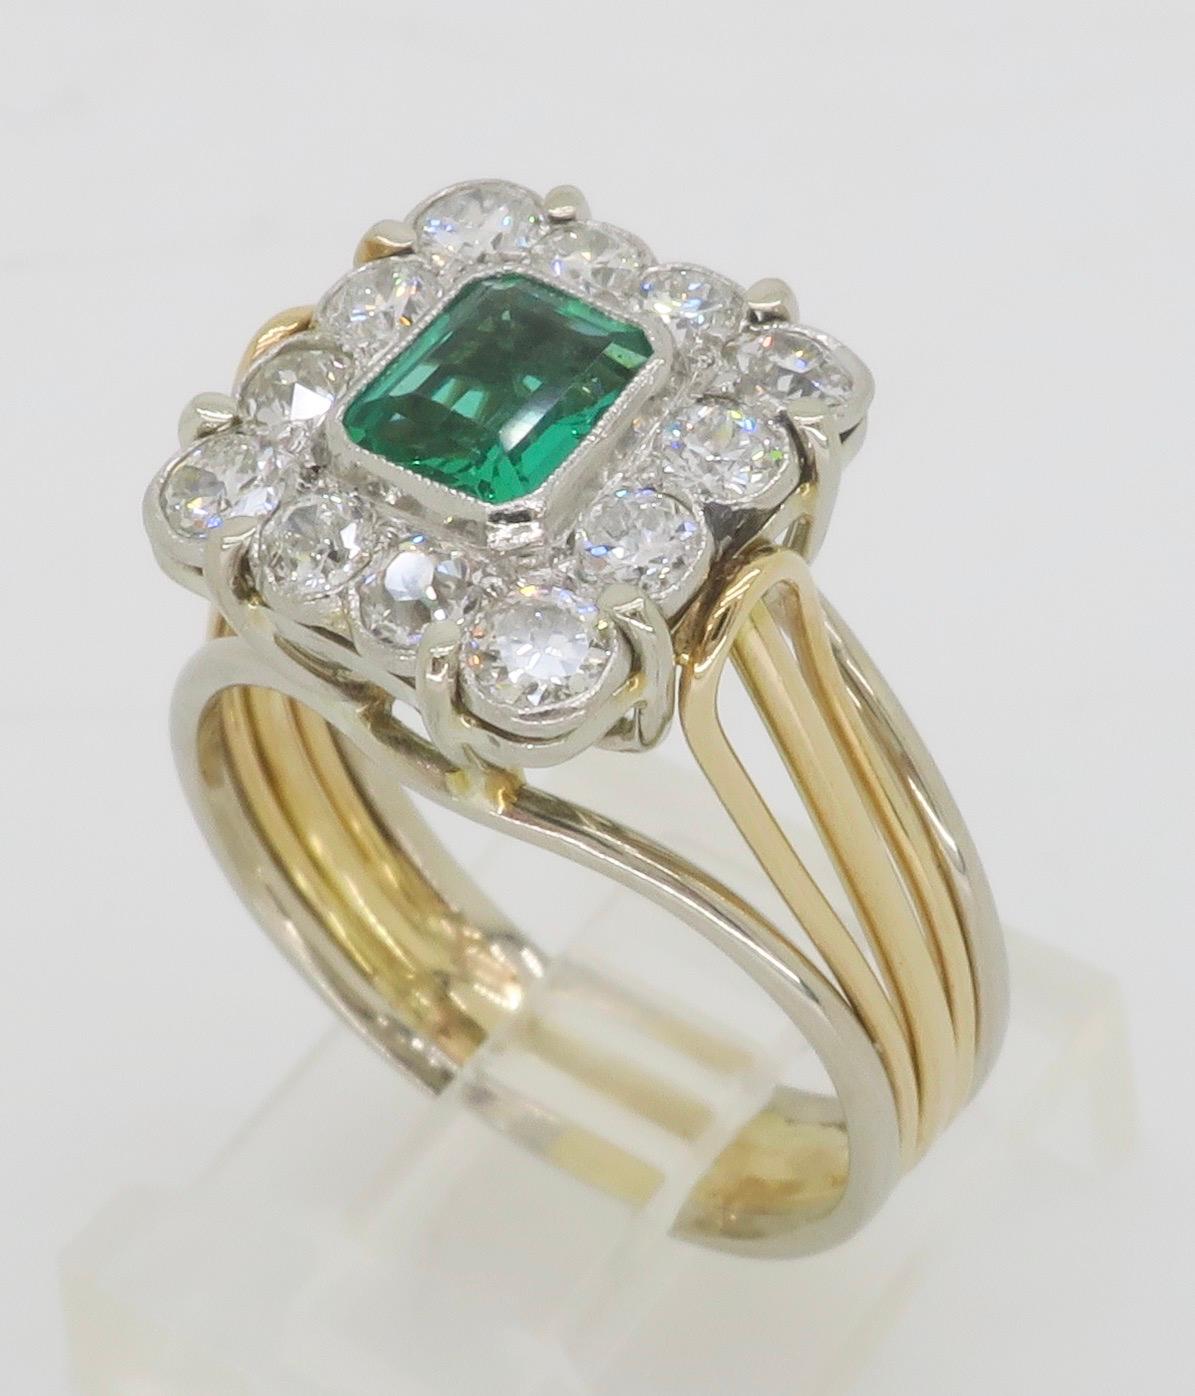 Vintage Emerald & Diamond Ring Crafted in Platinum & 18k Gold  For Sale 5